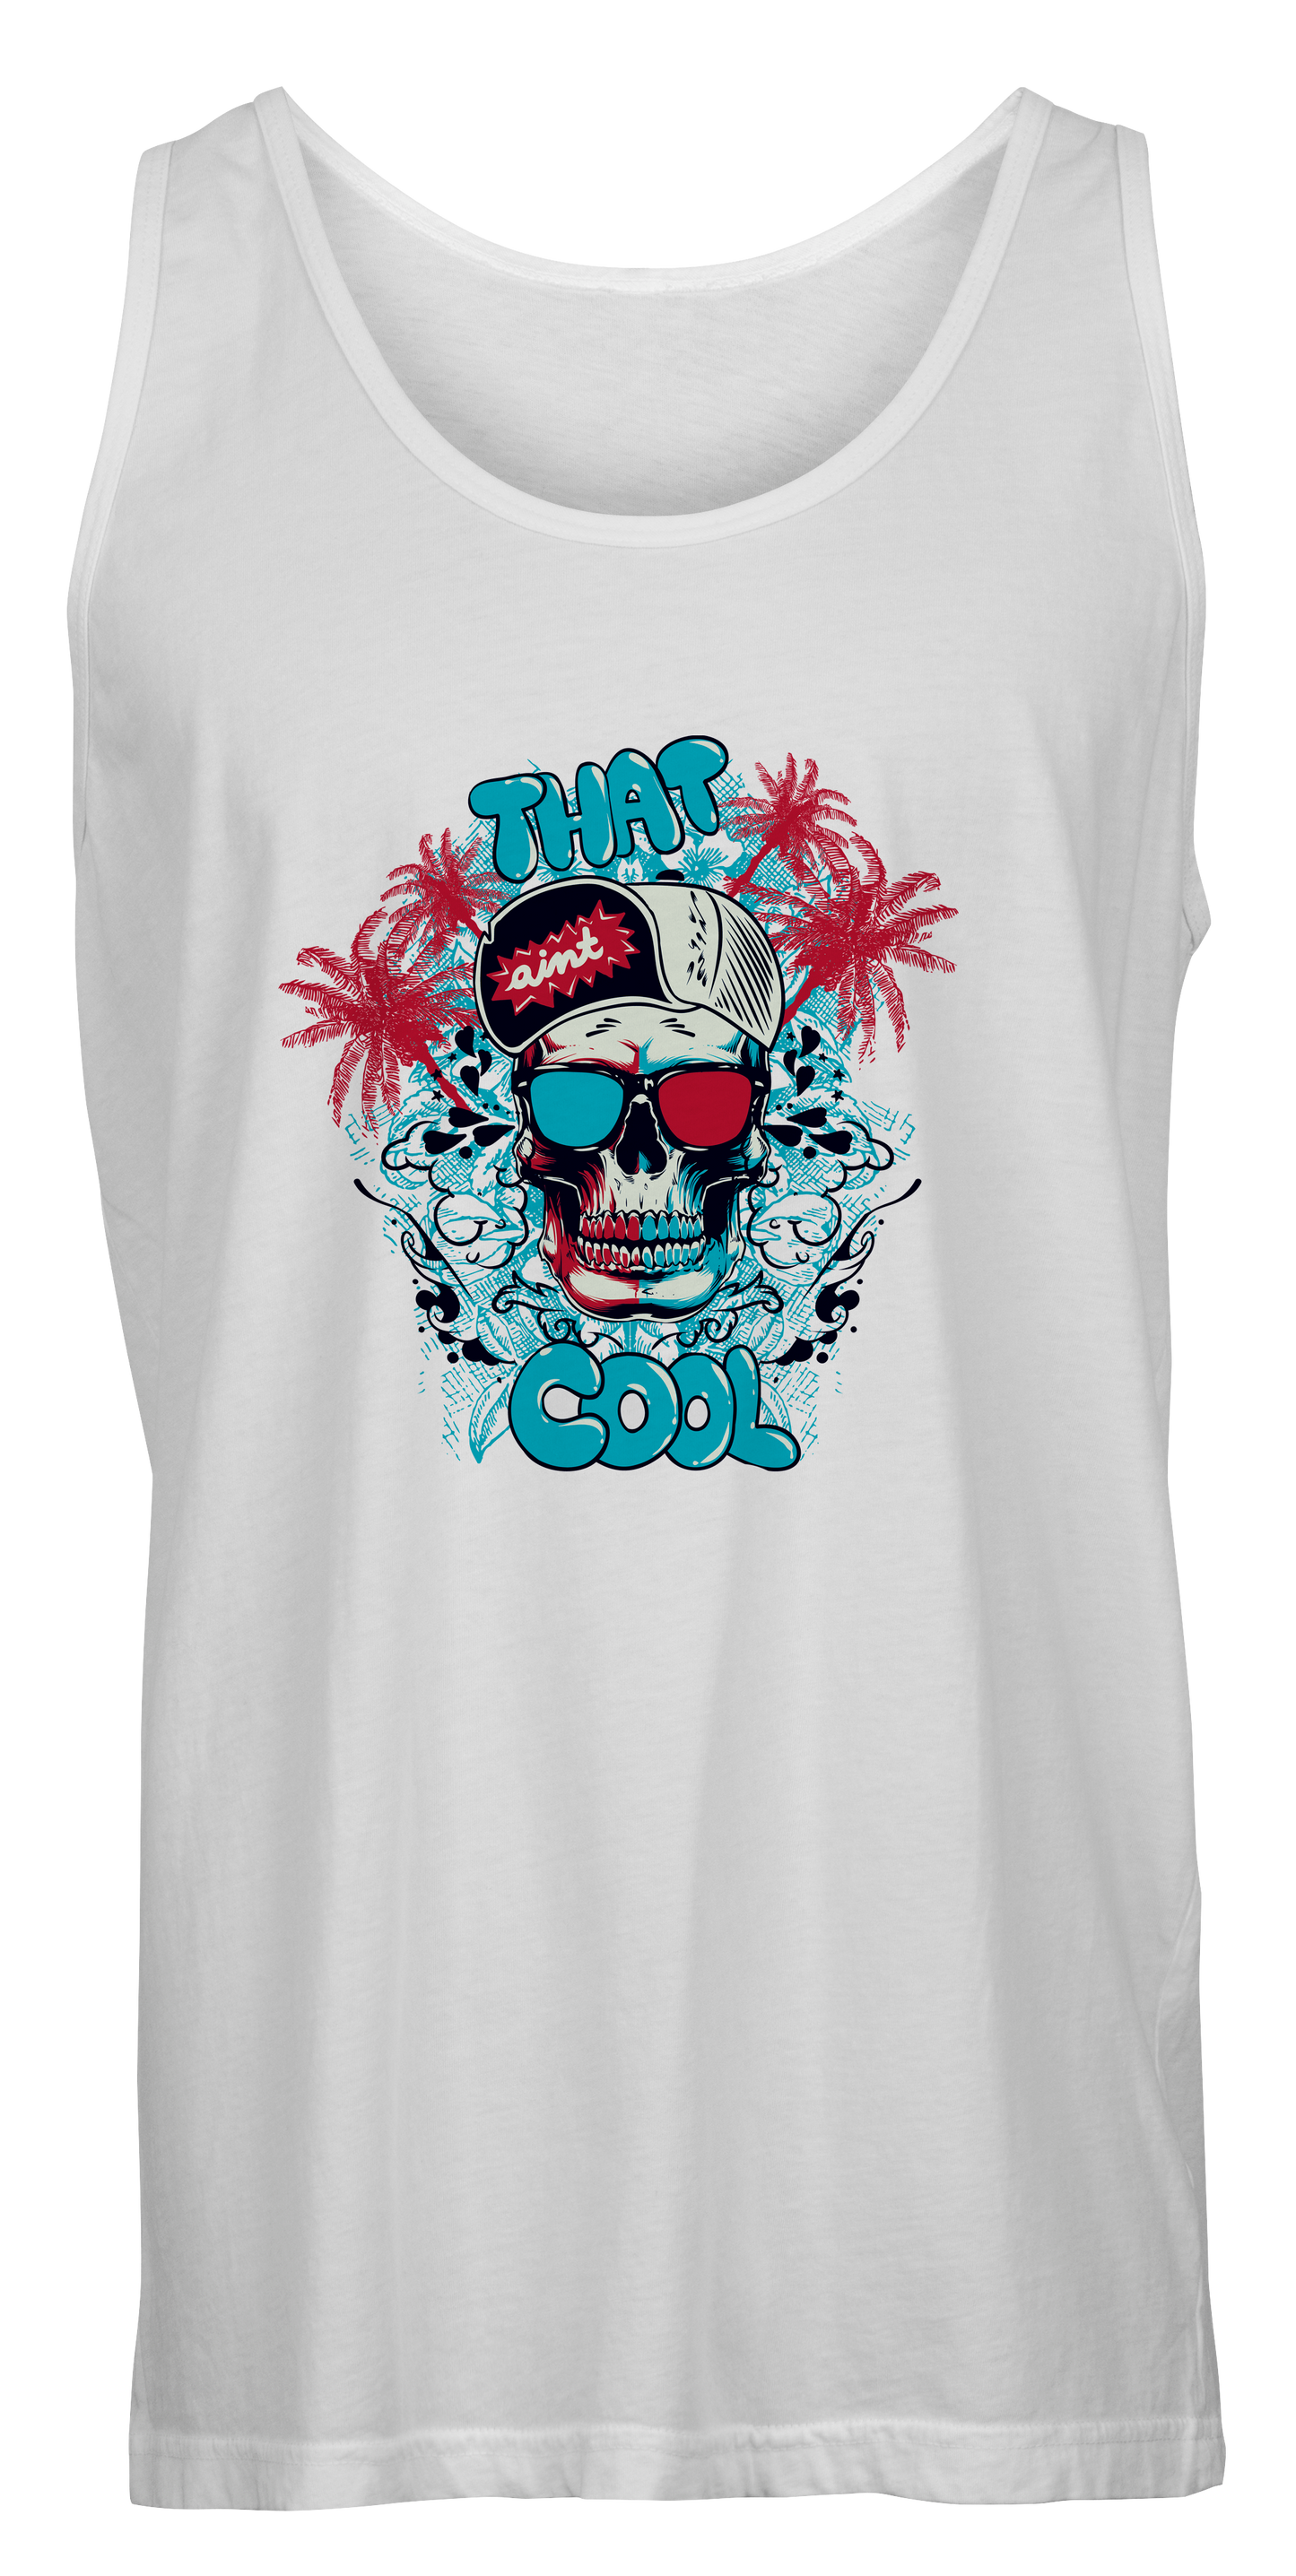 Ain't That Cool Tank Skull Graphic Tee